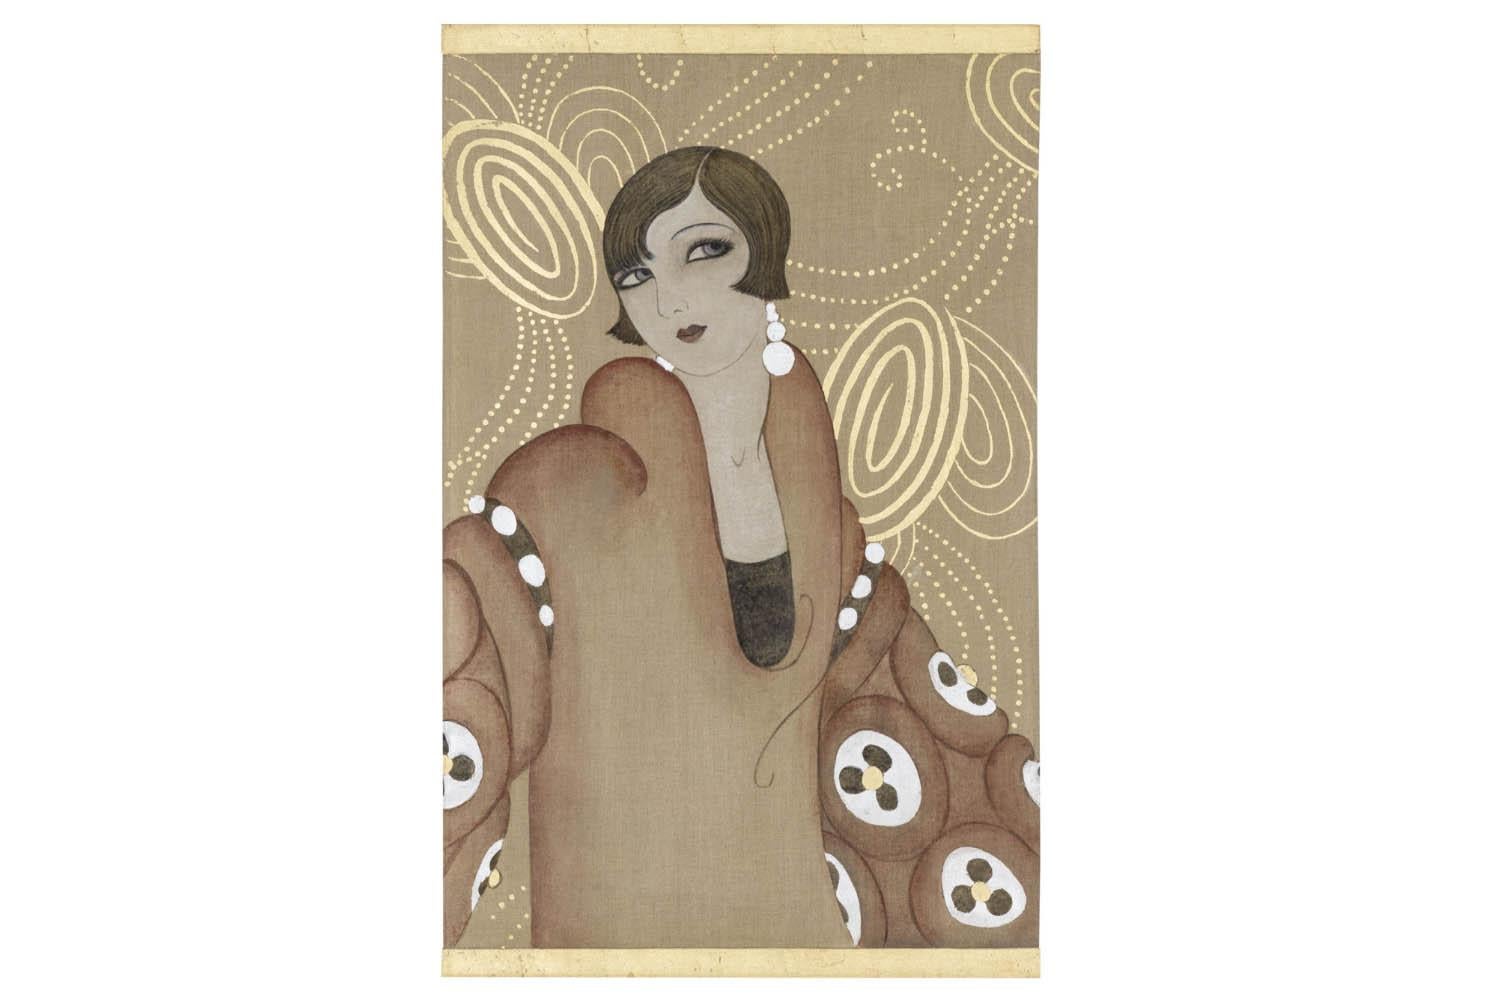 Painted canvas figuring a side view Art Deco woman. She wears a brown-orange coat with large sleeves with geometrical white, black and gilt motifs. She wears white earrings. She has short black hairs.
Brown background with gilt geometrical